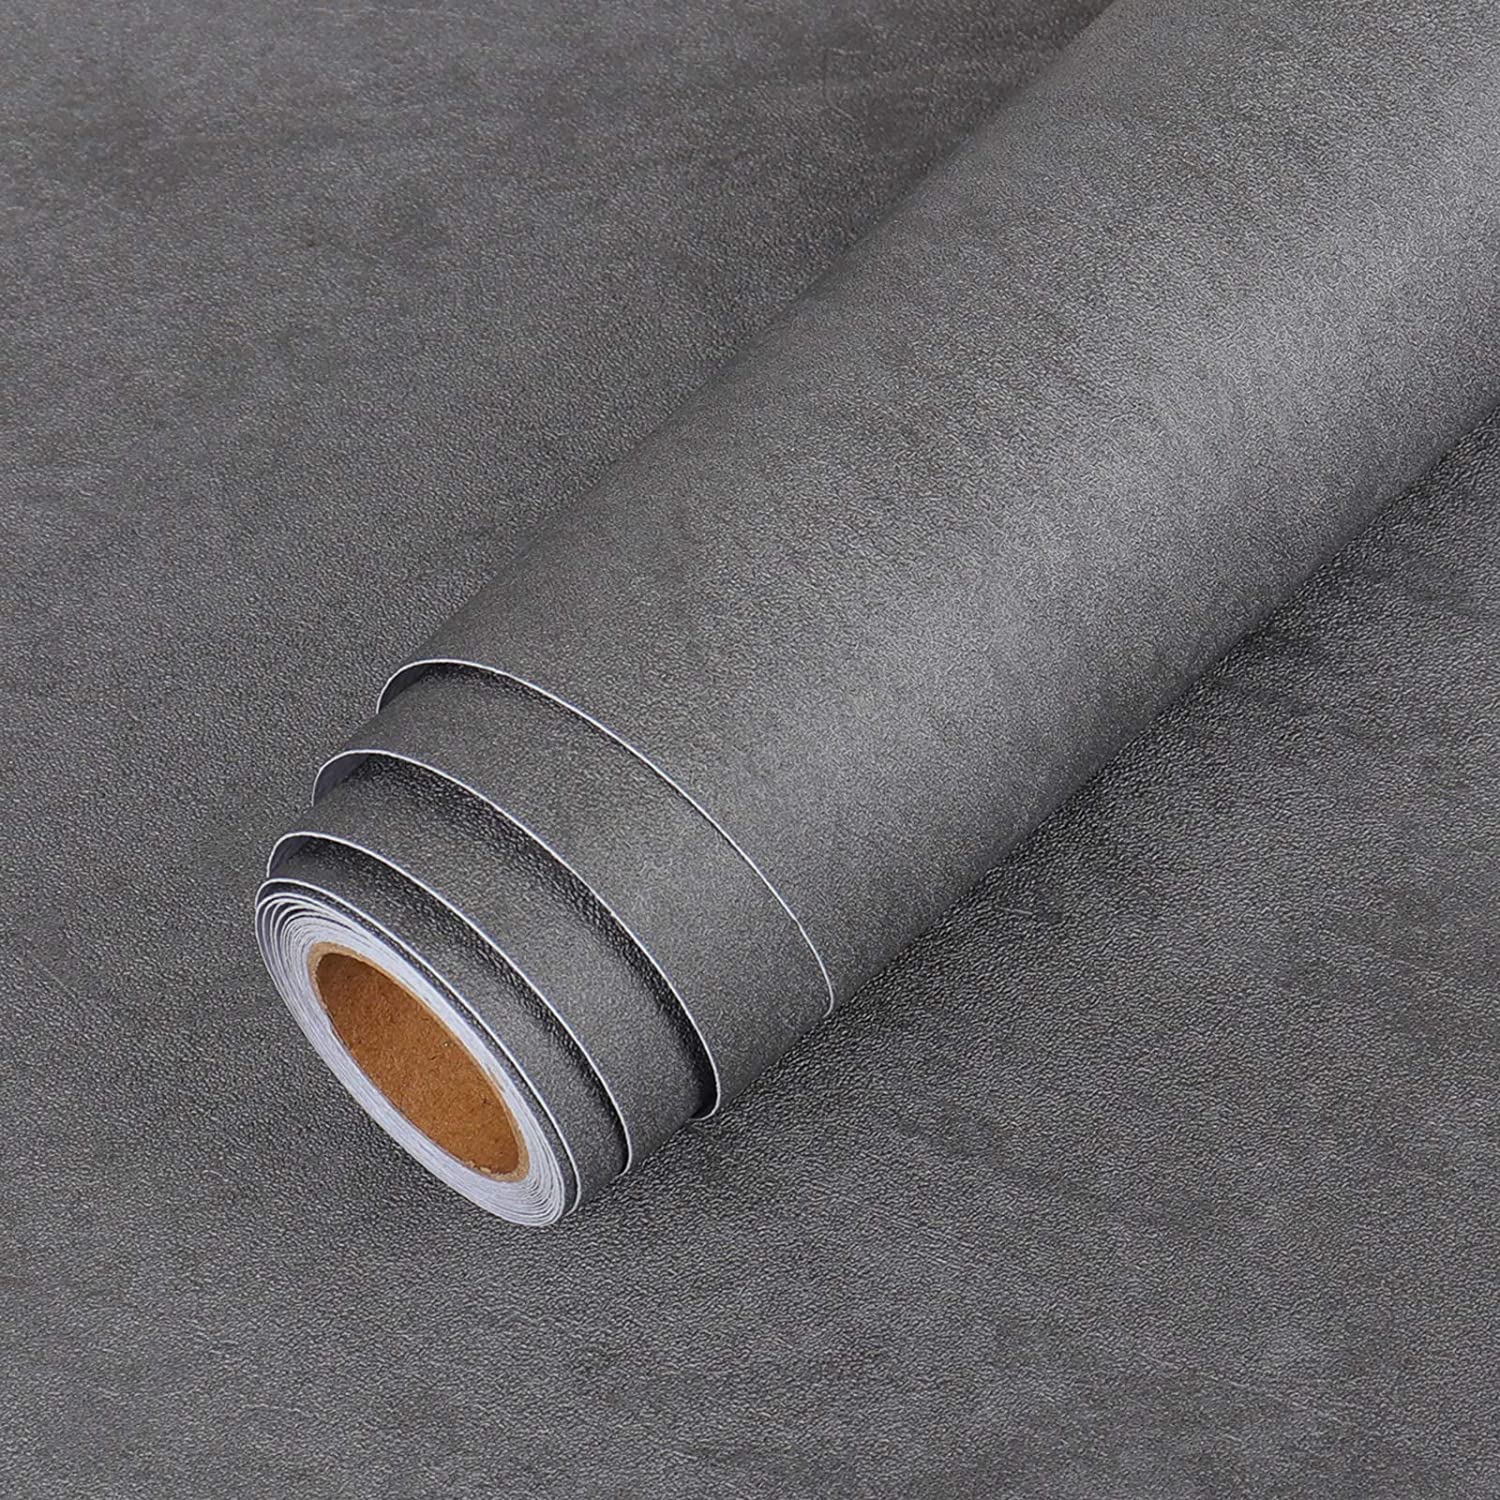 LACHEERY, LaCheery Extra Thick Matte Concrete Wallpaper Stick and Peel Wall Paper Roll Dark Grey Vinyl Countertops Vintage Industry Concrete Textured Cement Contact Paper for Bedroom Walls Furniture 12 x317